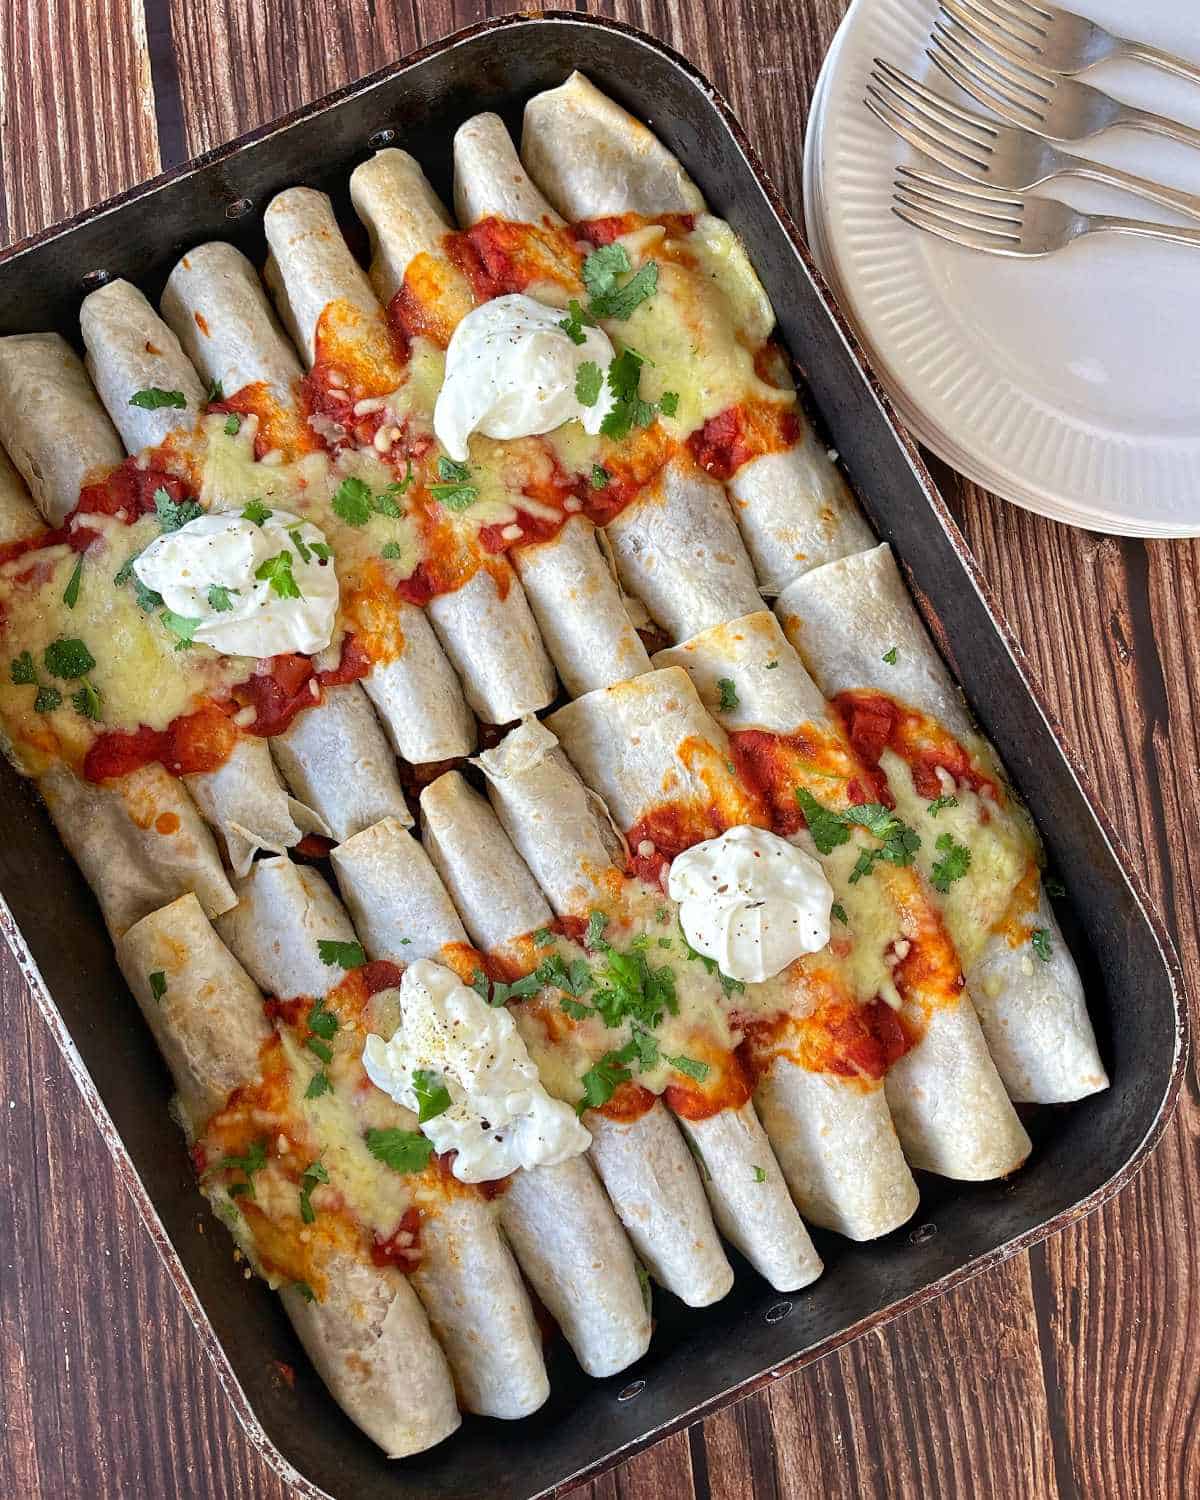 Cooked beef enchiladas served with sour cream and coriander